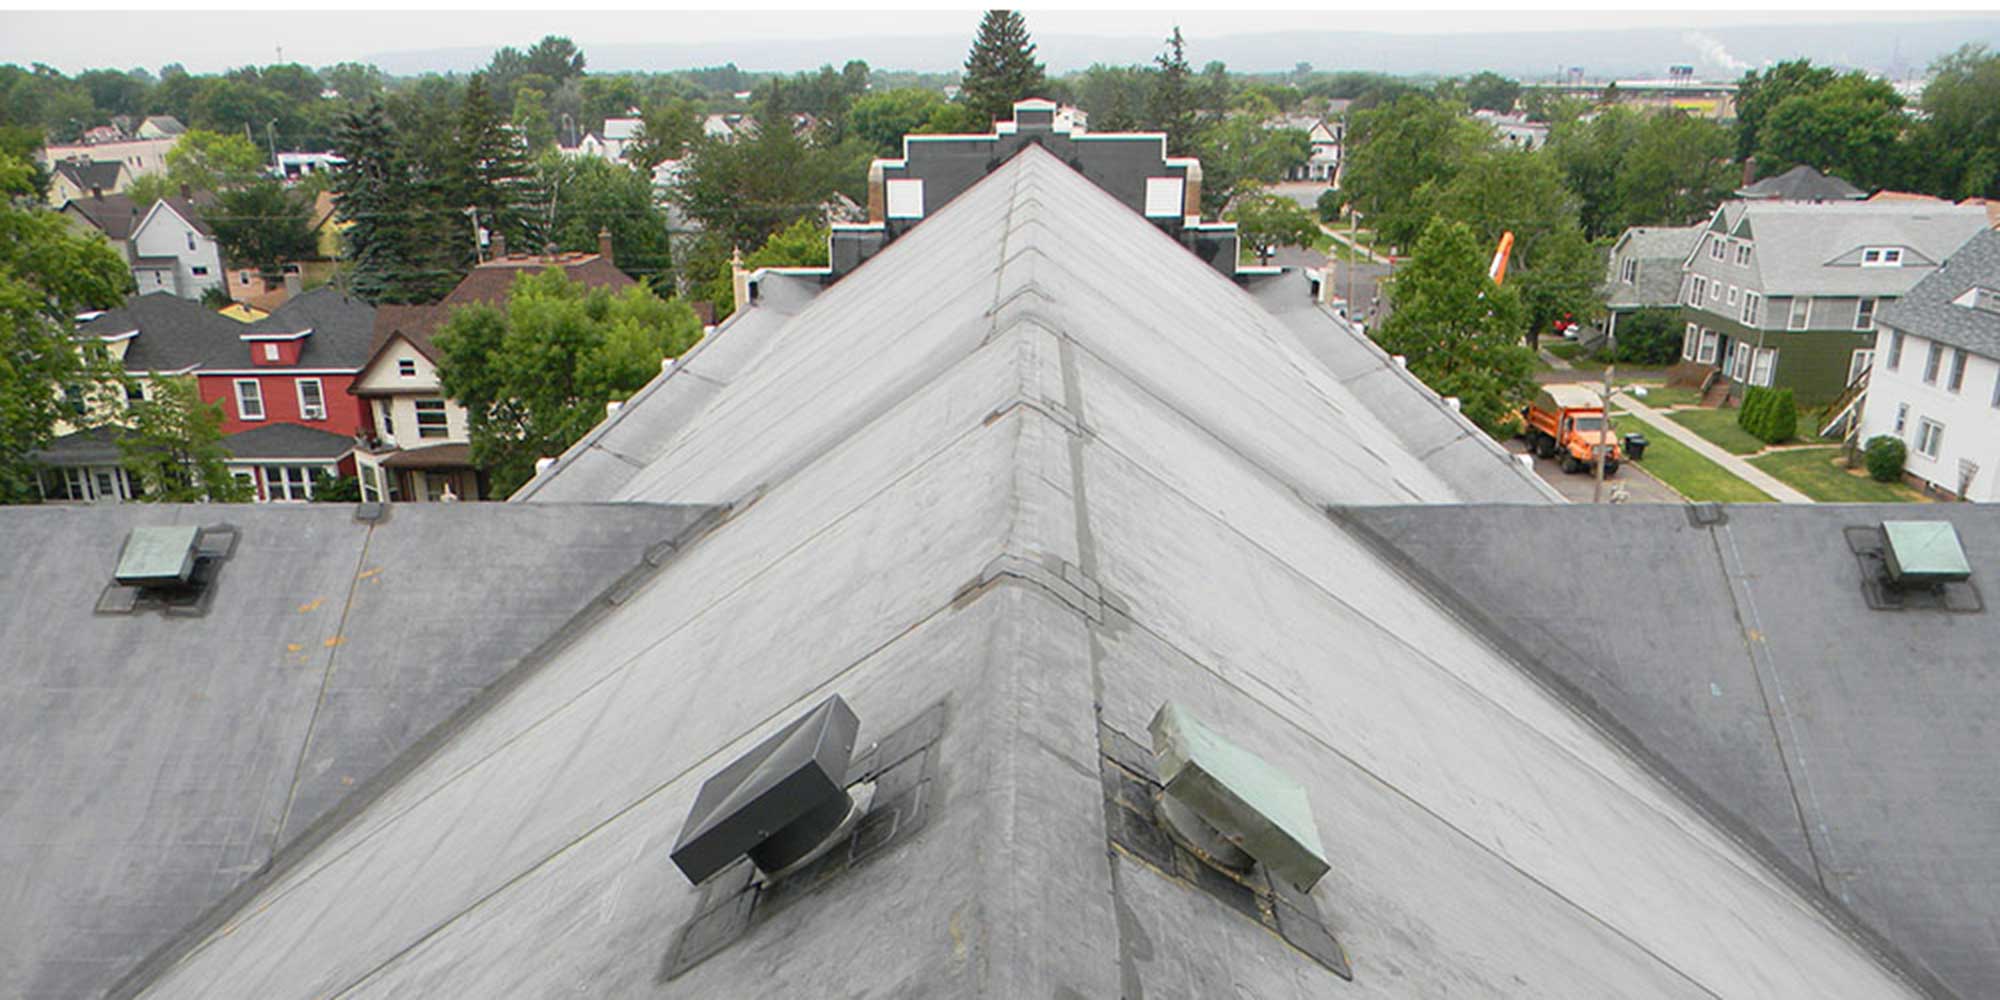 Concordia Lutheran roof by AW Kuettel - view of lake superior